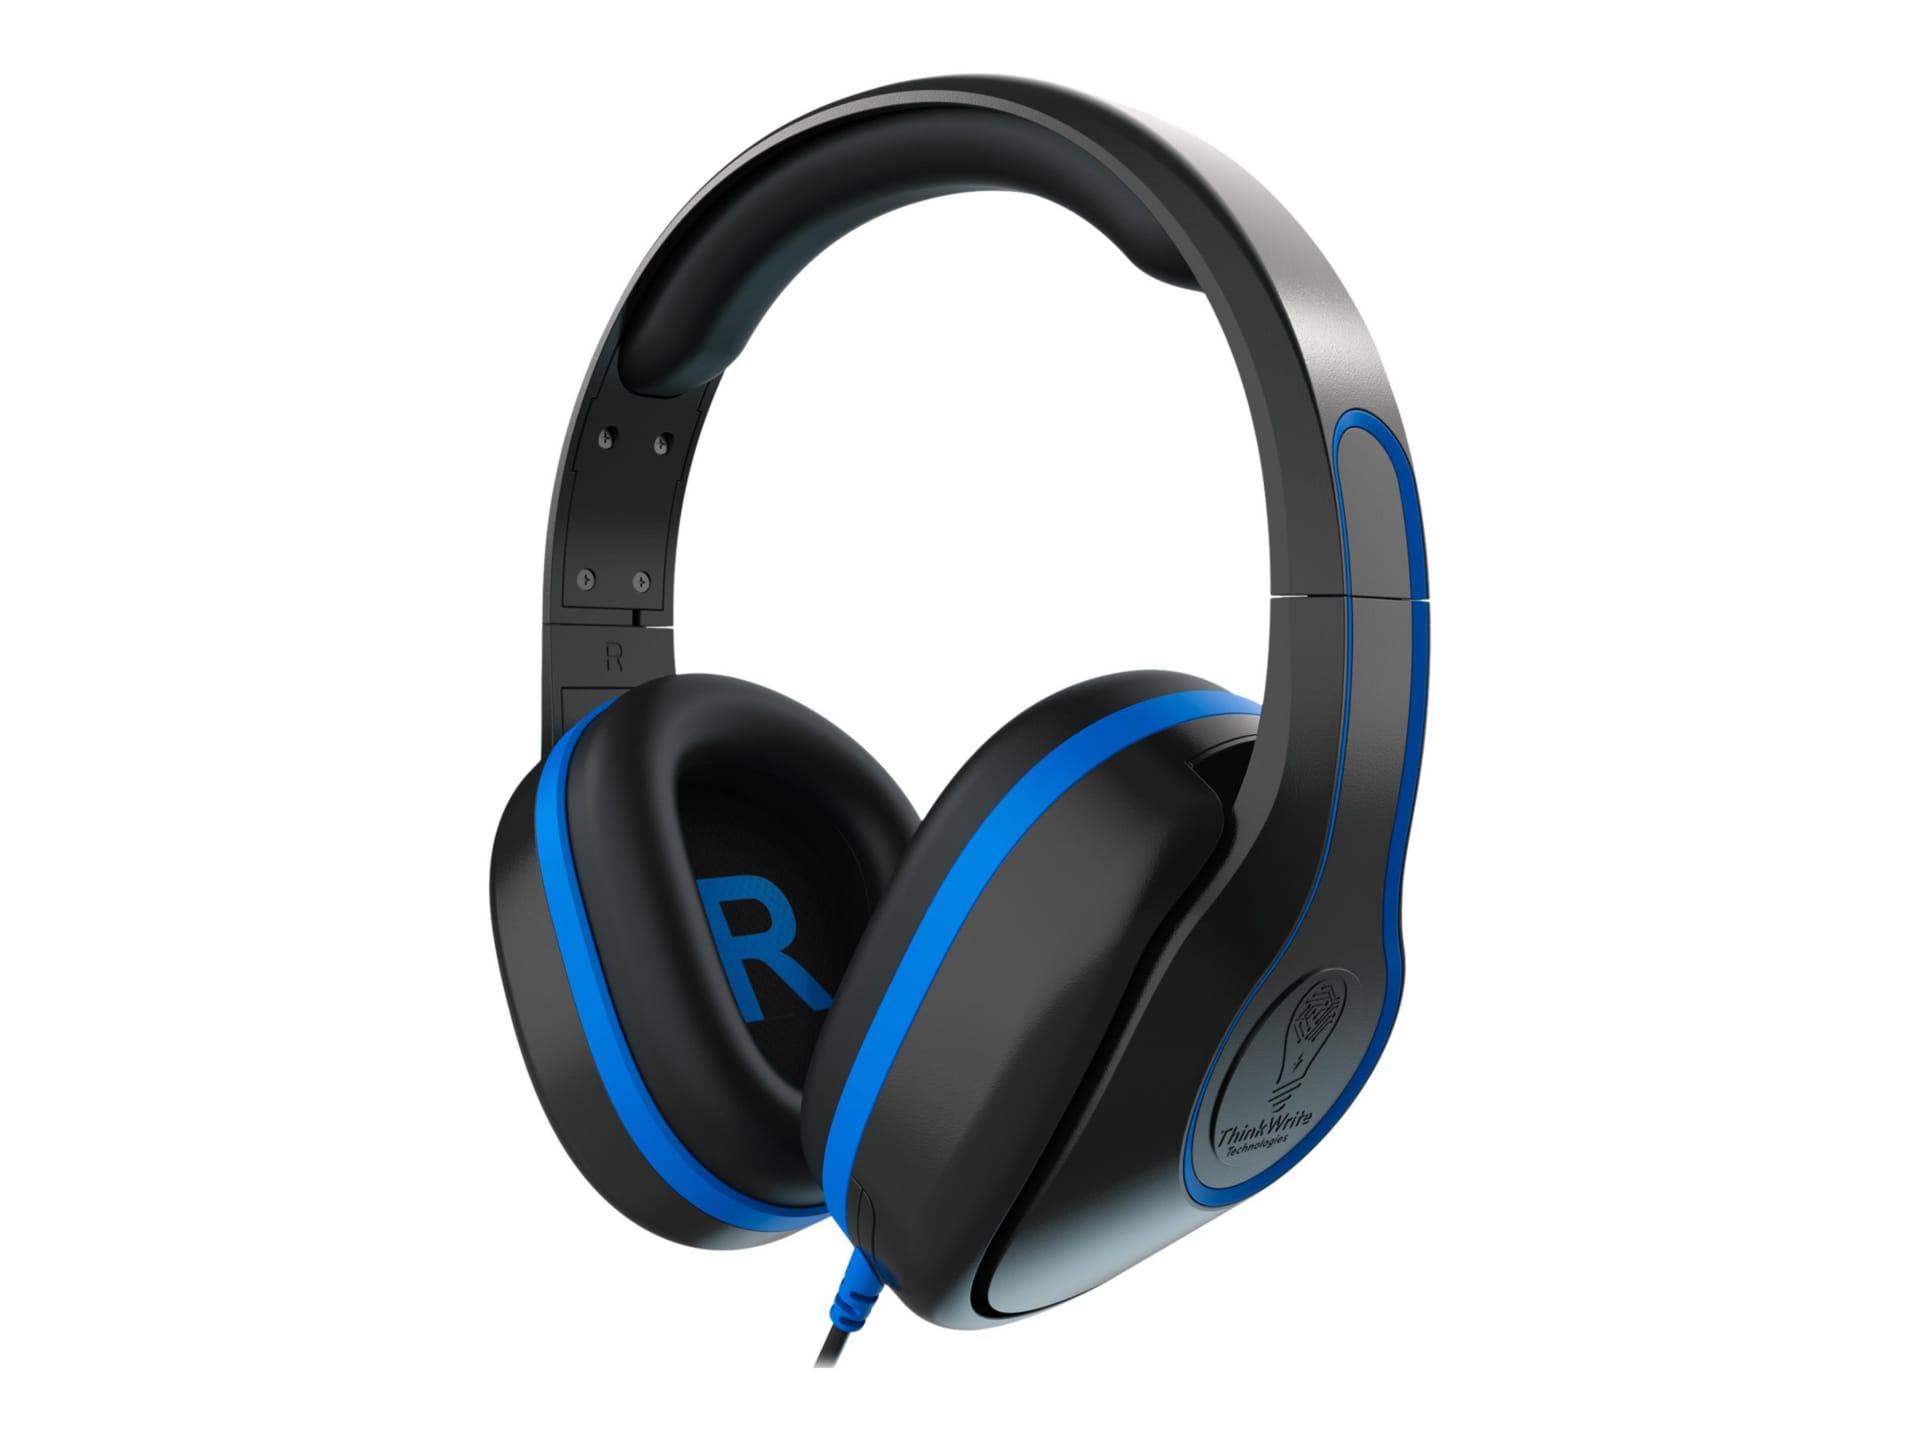 TWT Audio REVO TW300 with Stealth Release - wired headphone - black and blu